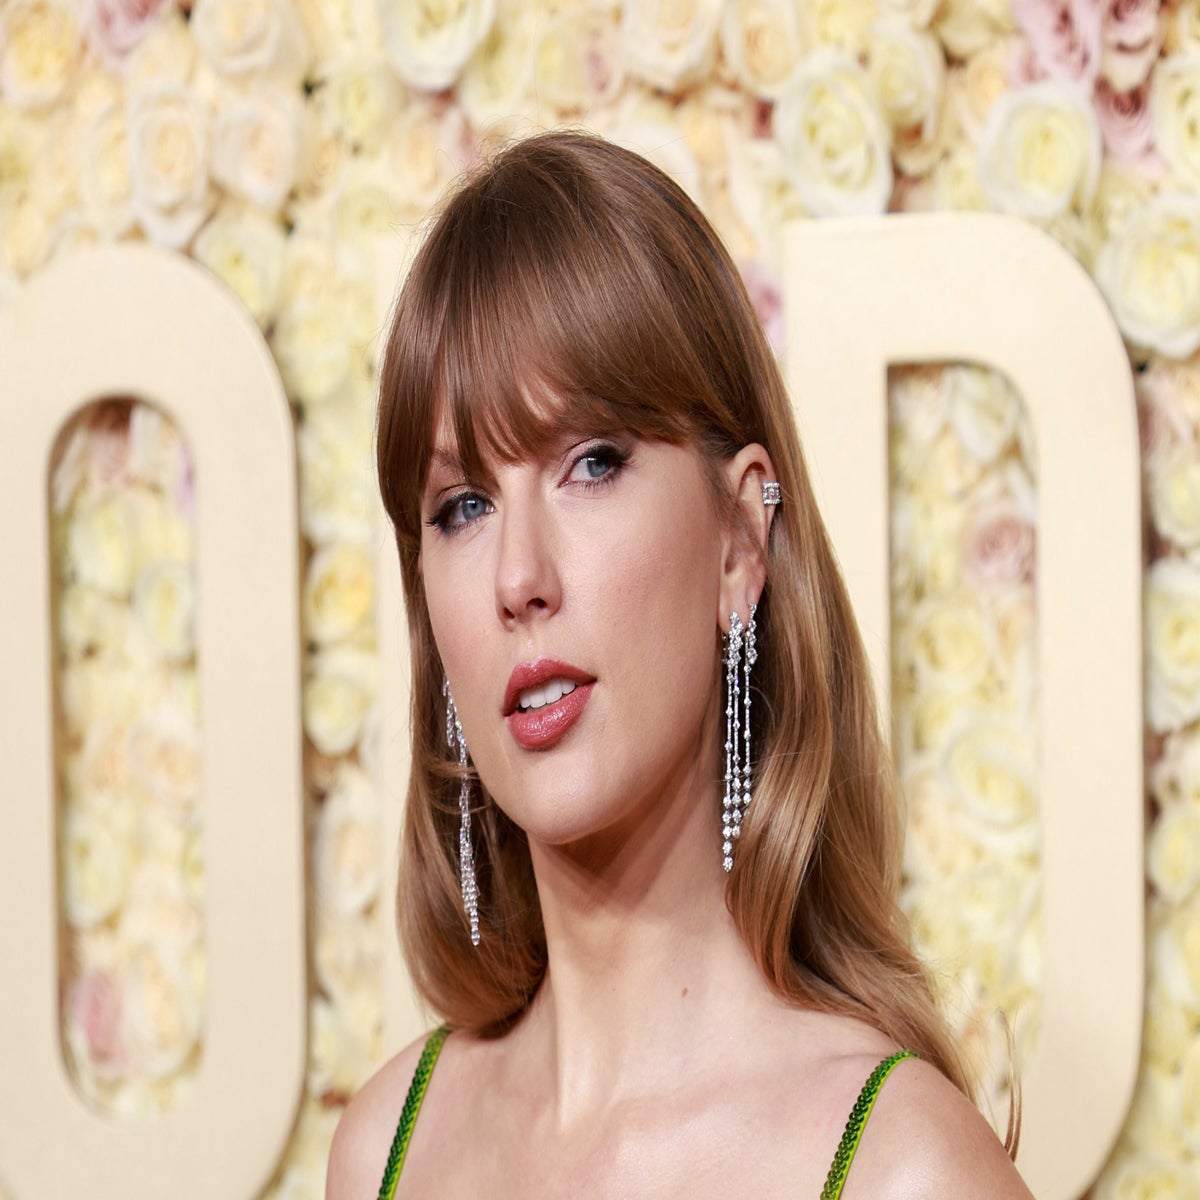 Xxx Pikcher - Disgusting' Taylor Swift AI images circulated on X/Twitter despite platform  rules | The Independent